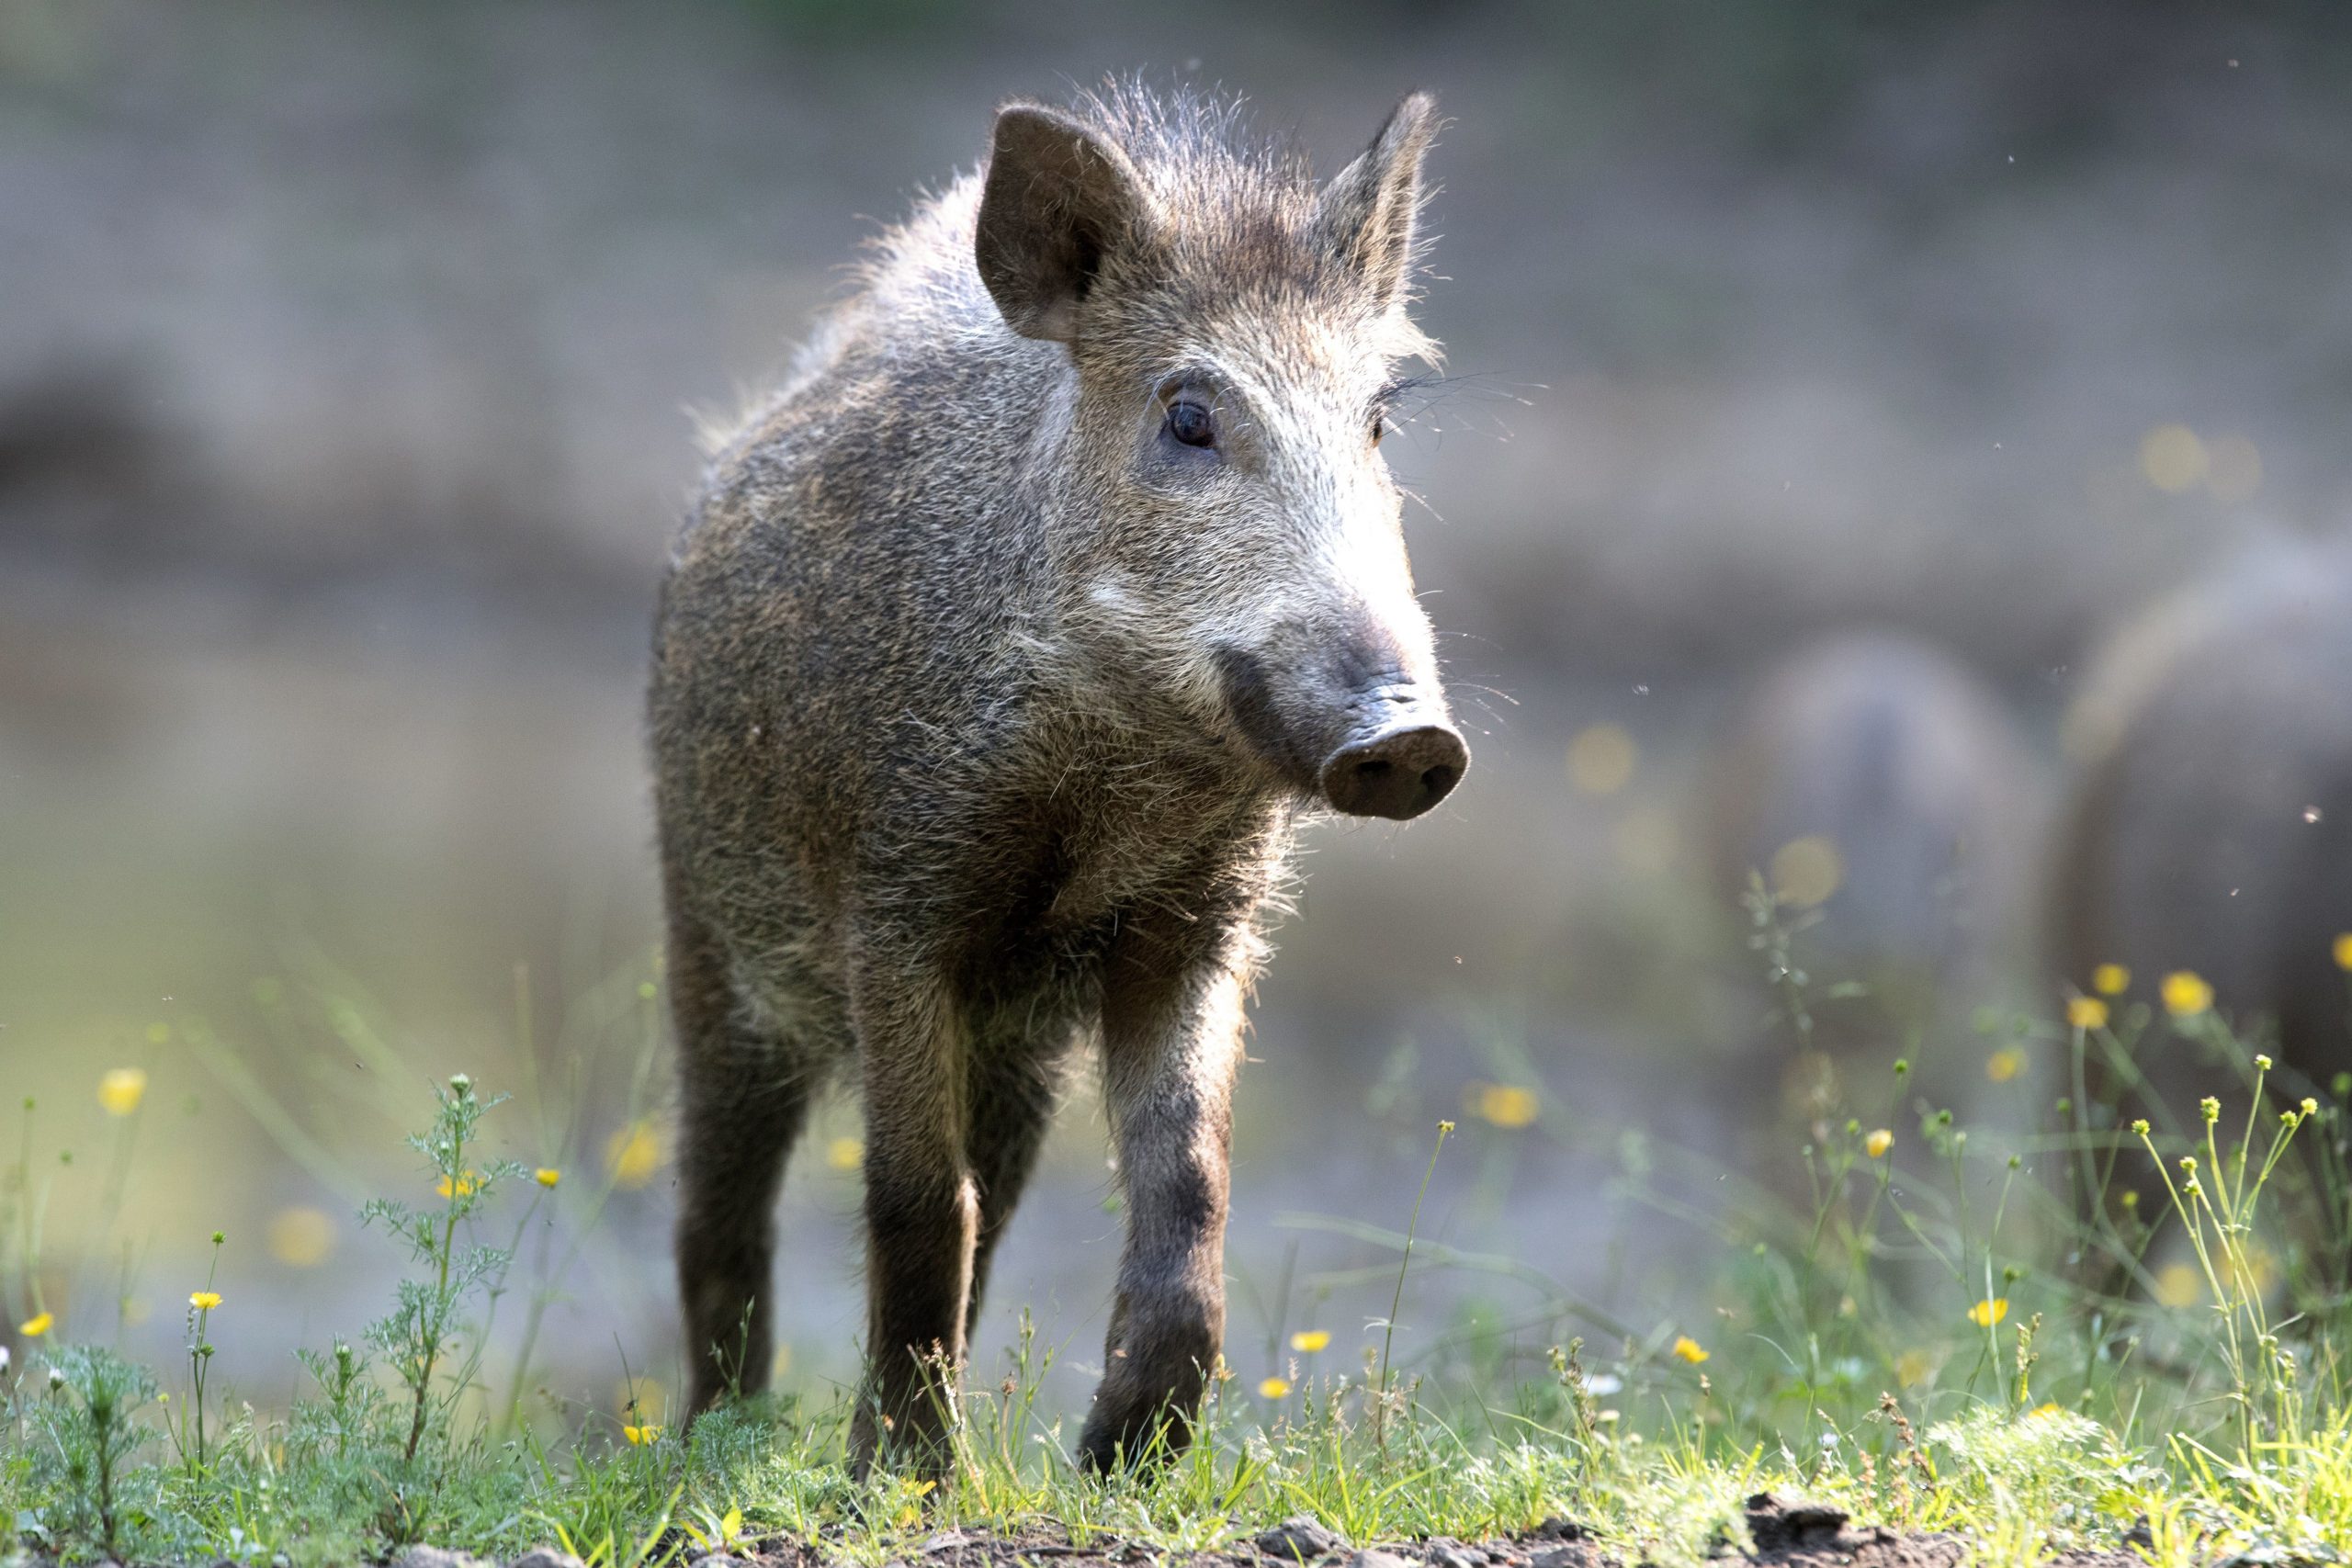 Wild boar causes panic on Costa Blanca beach in Spain and bites elderly woman